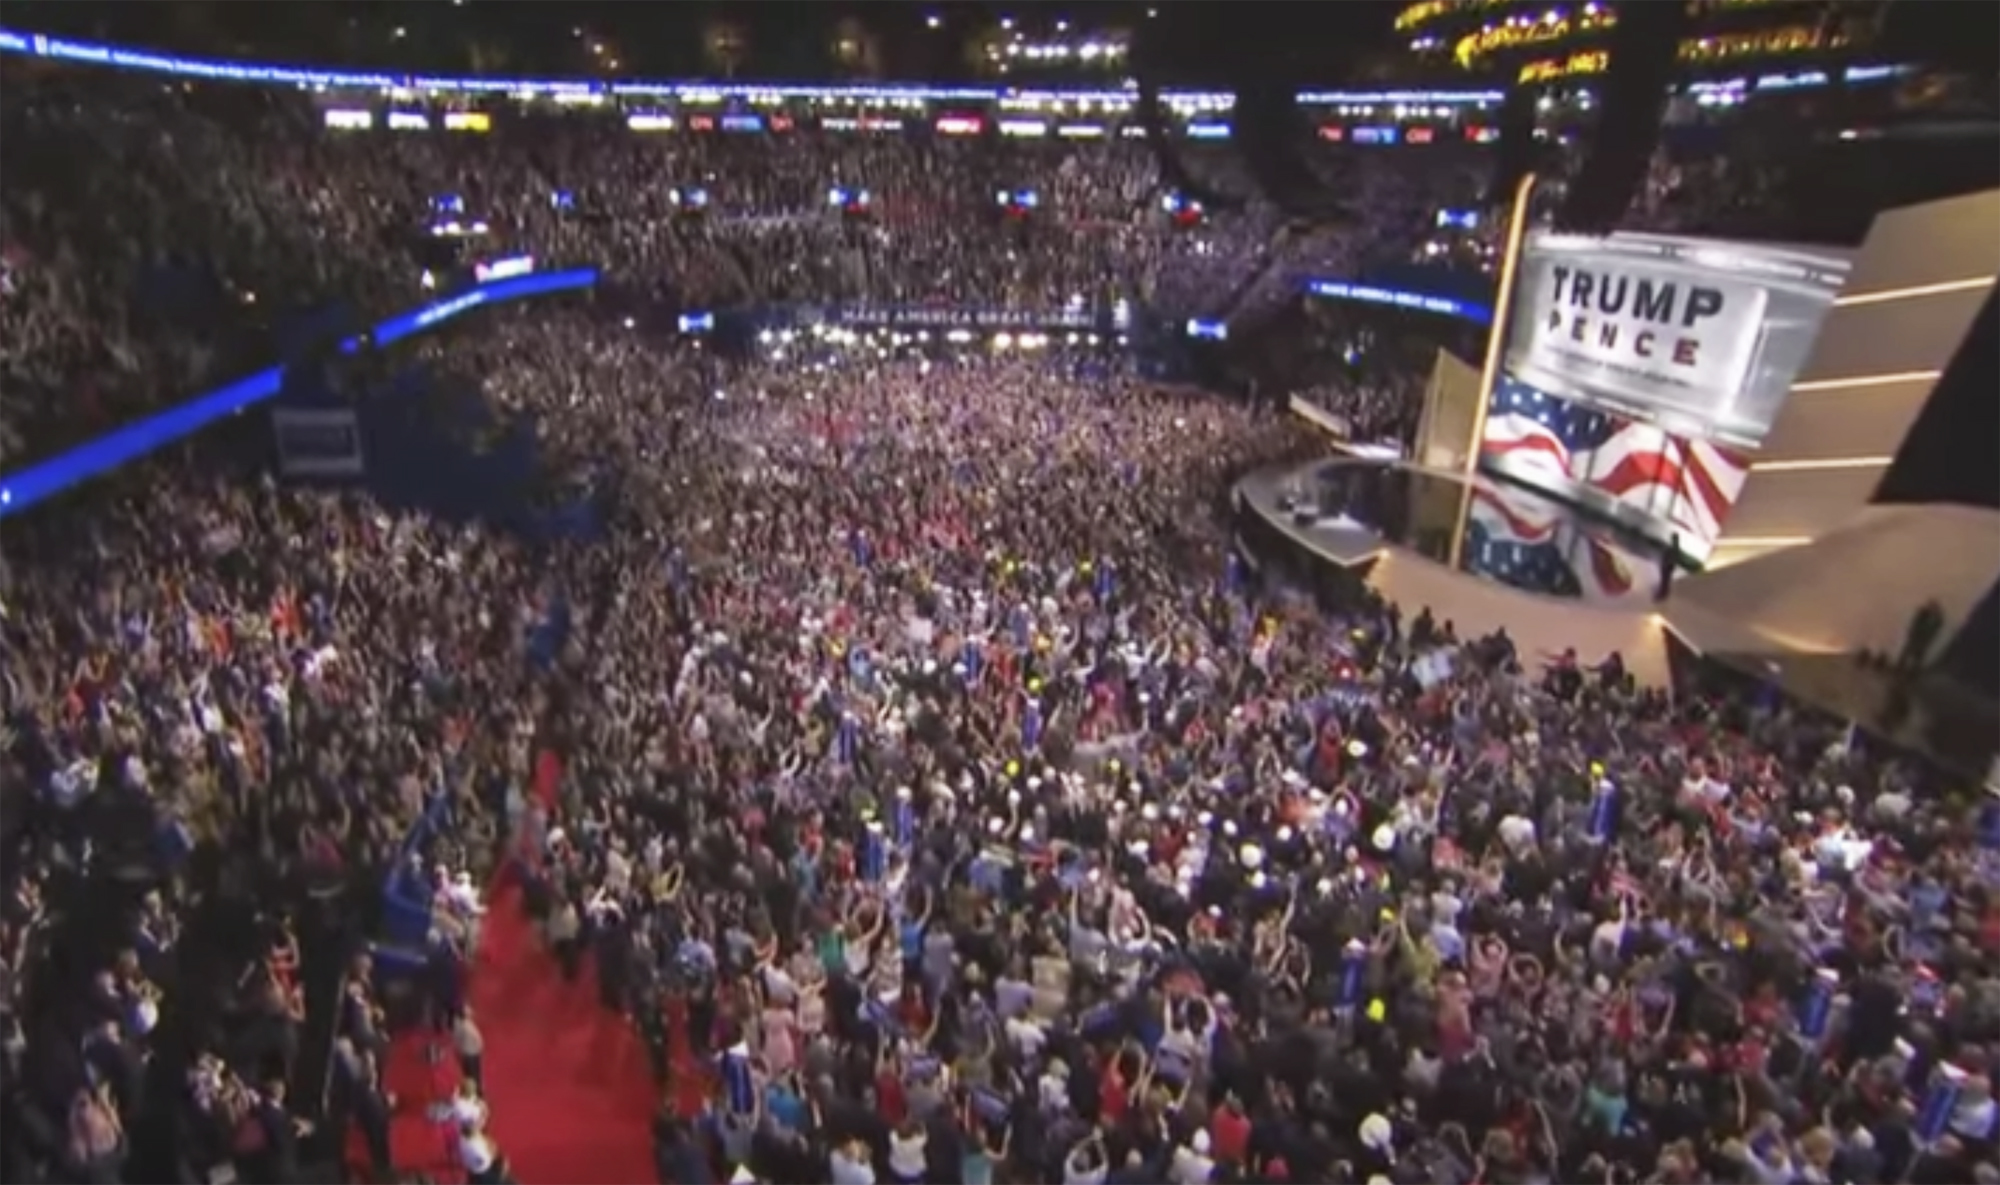 In 2016, Cleveland planned for 50,000 people to attend the the Republican National Convention.